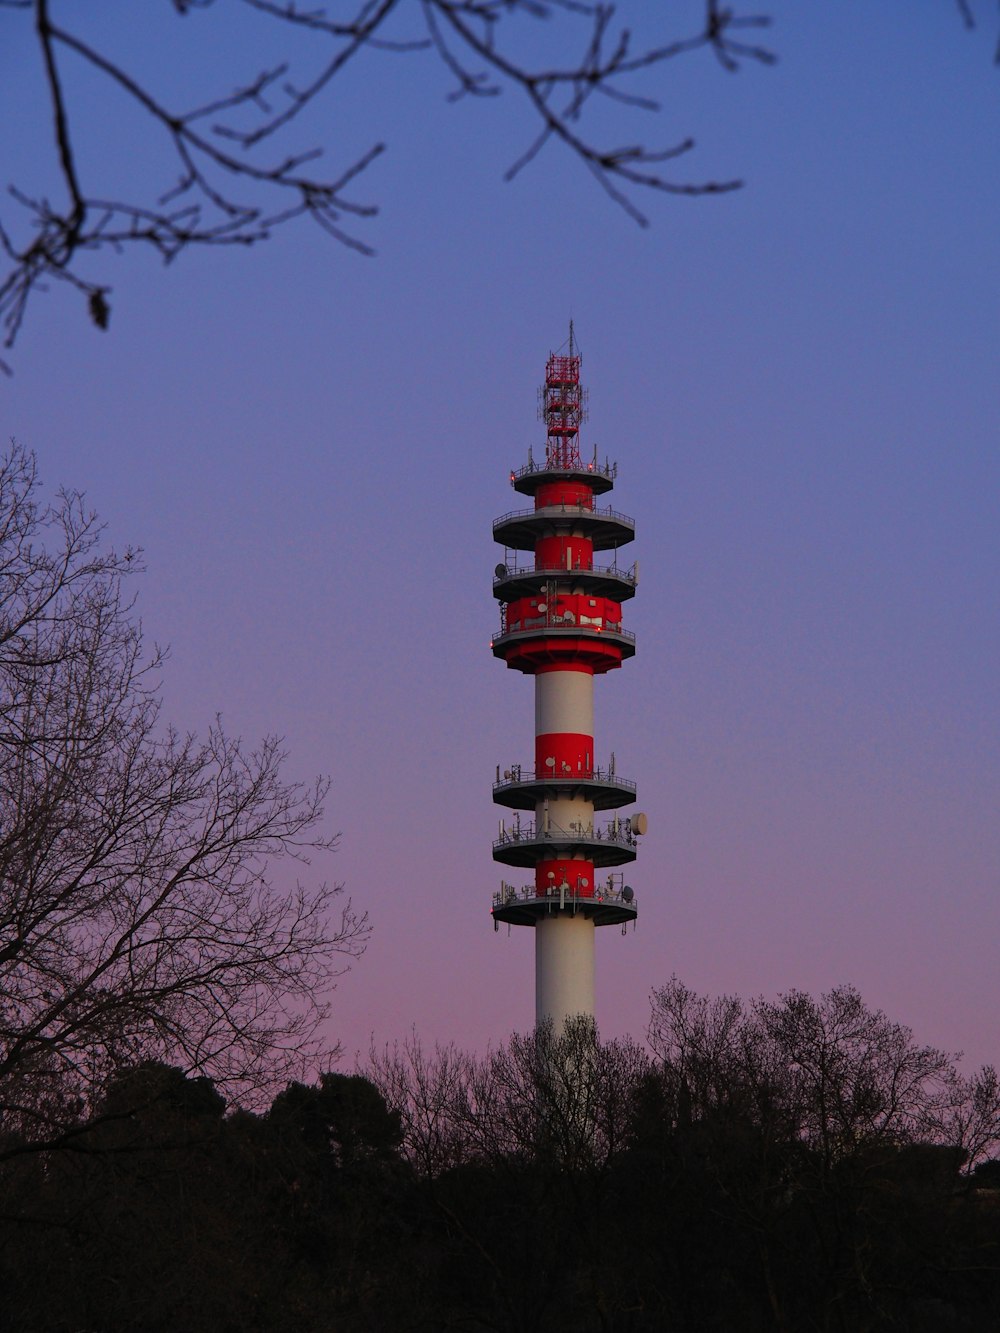 a tall tower with a red and white top